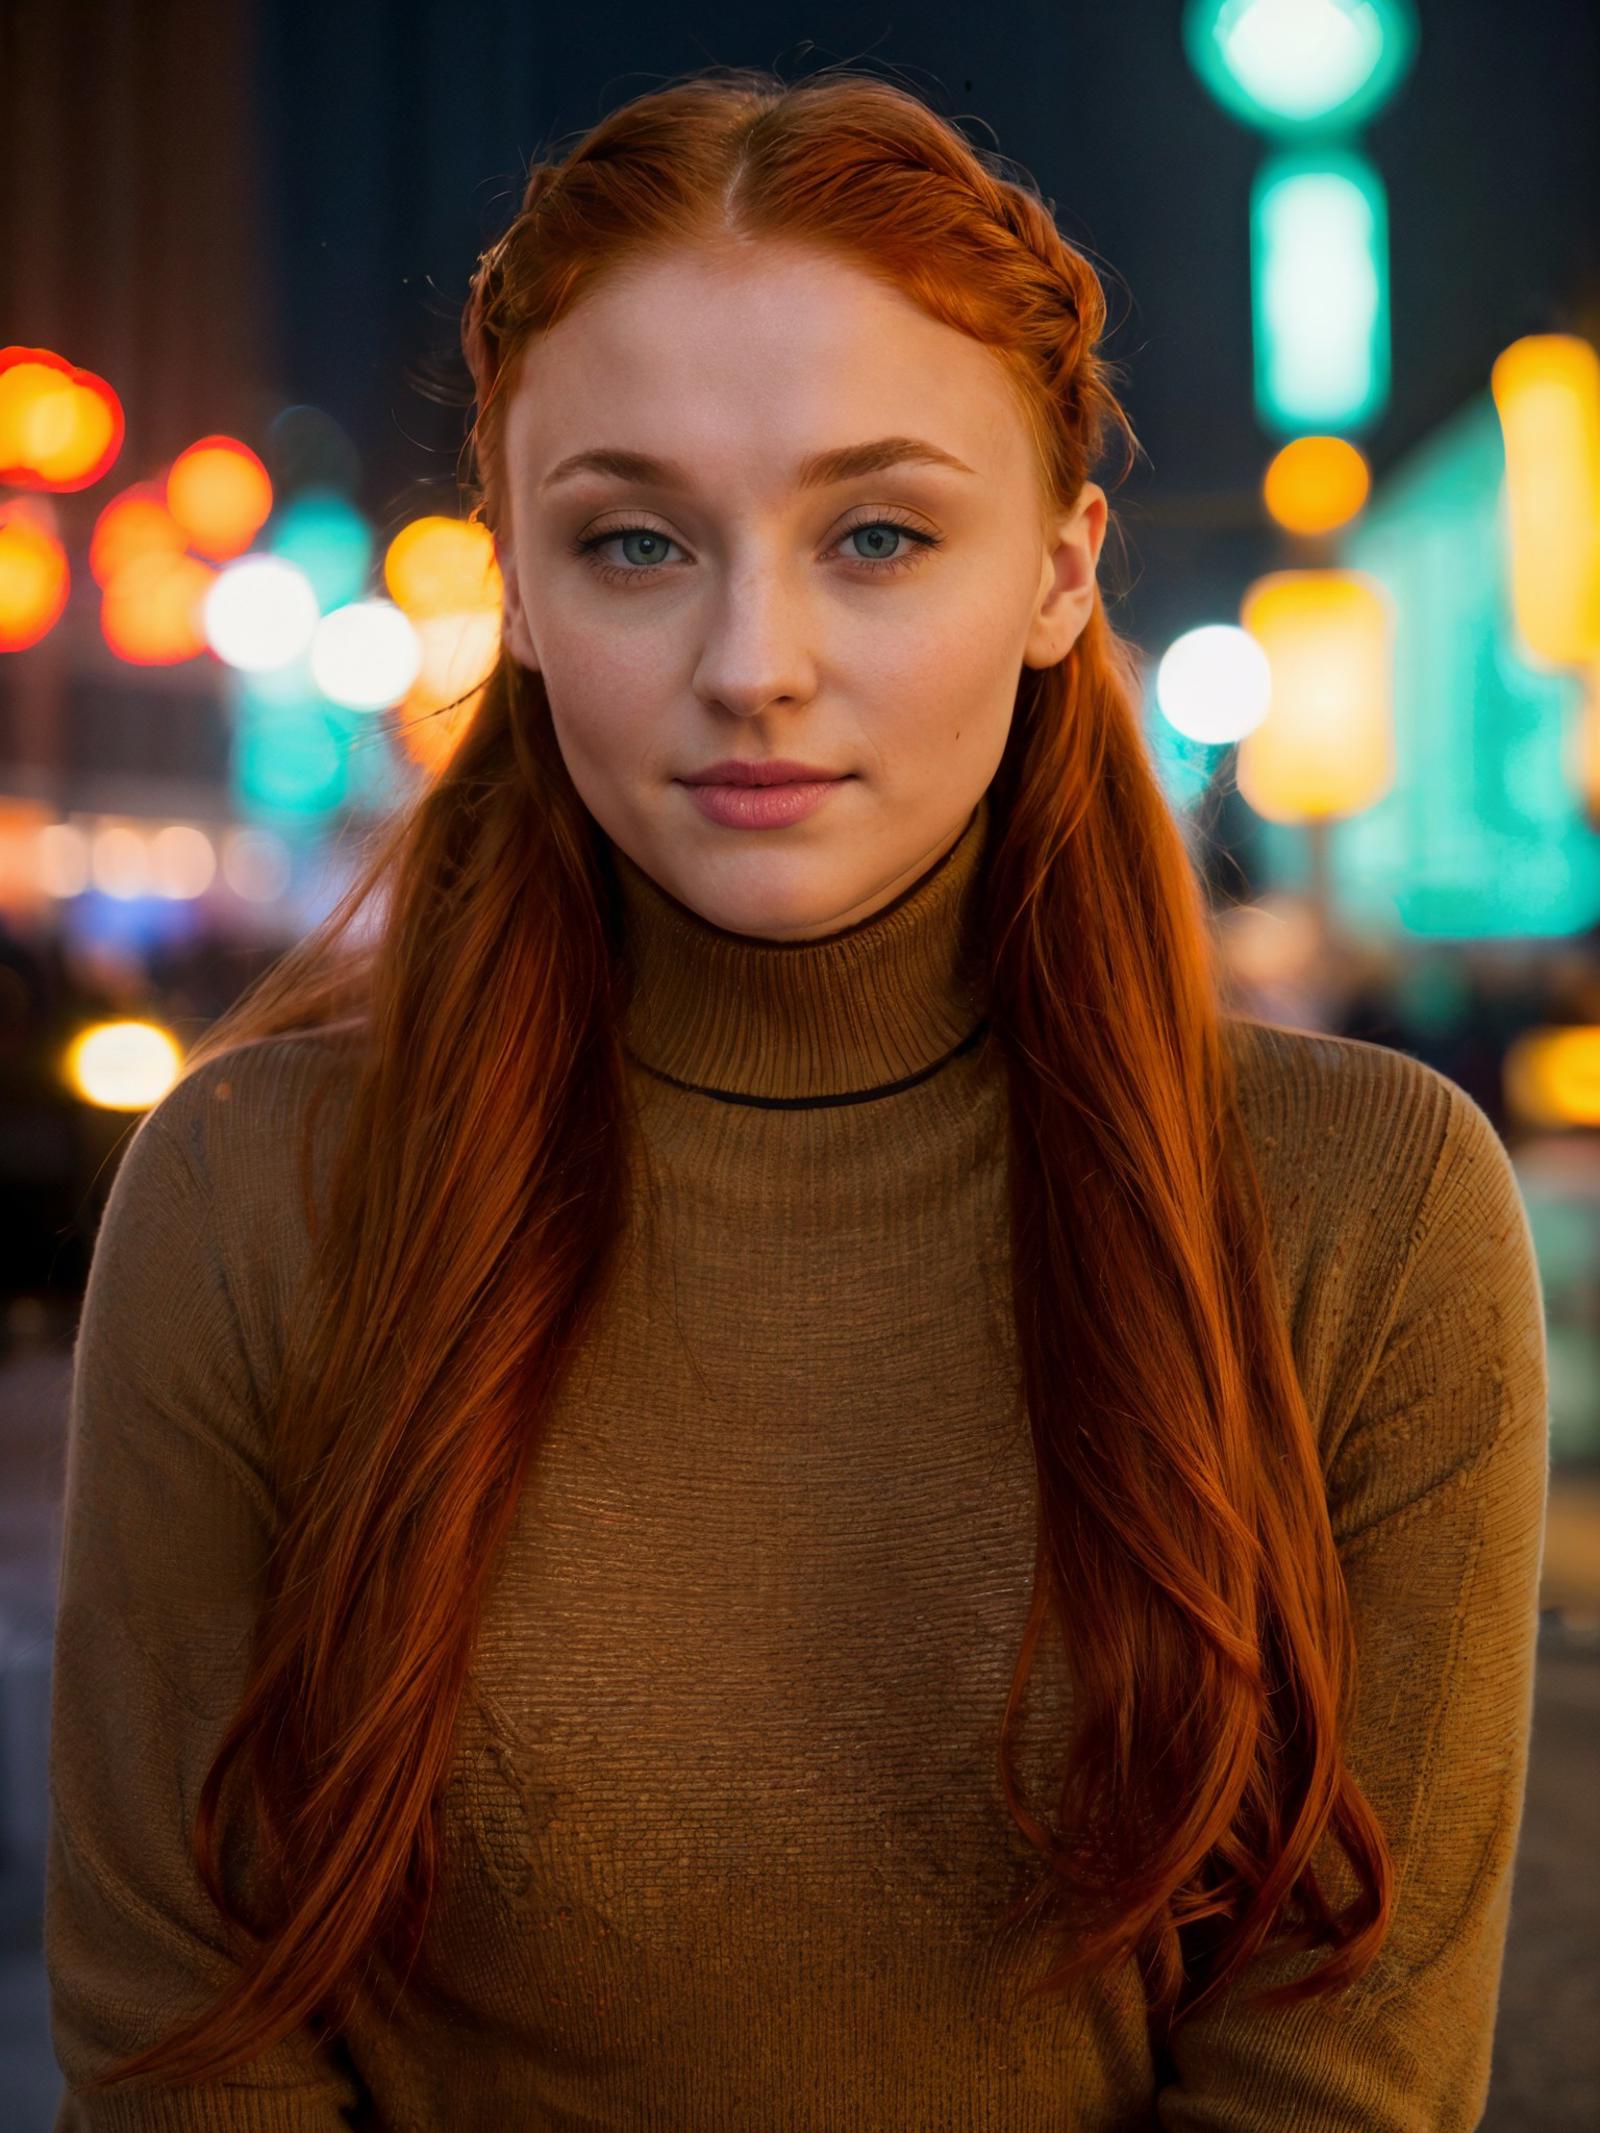 Sophie Turner image by damocles_aaa